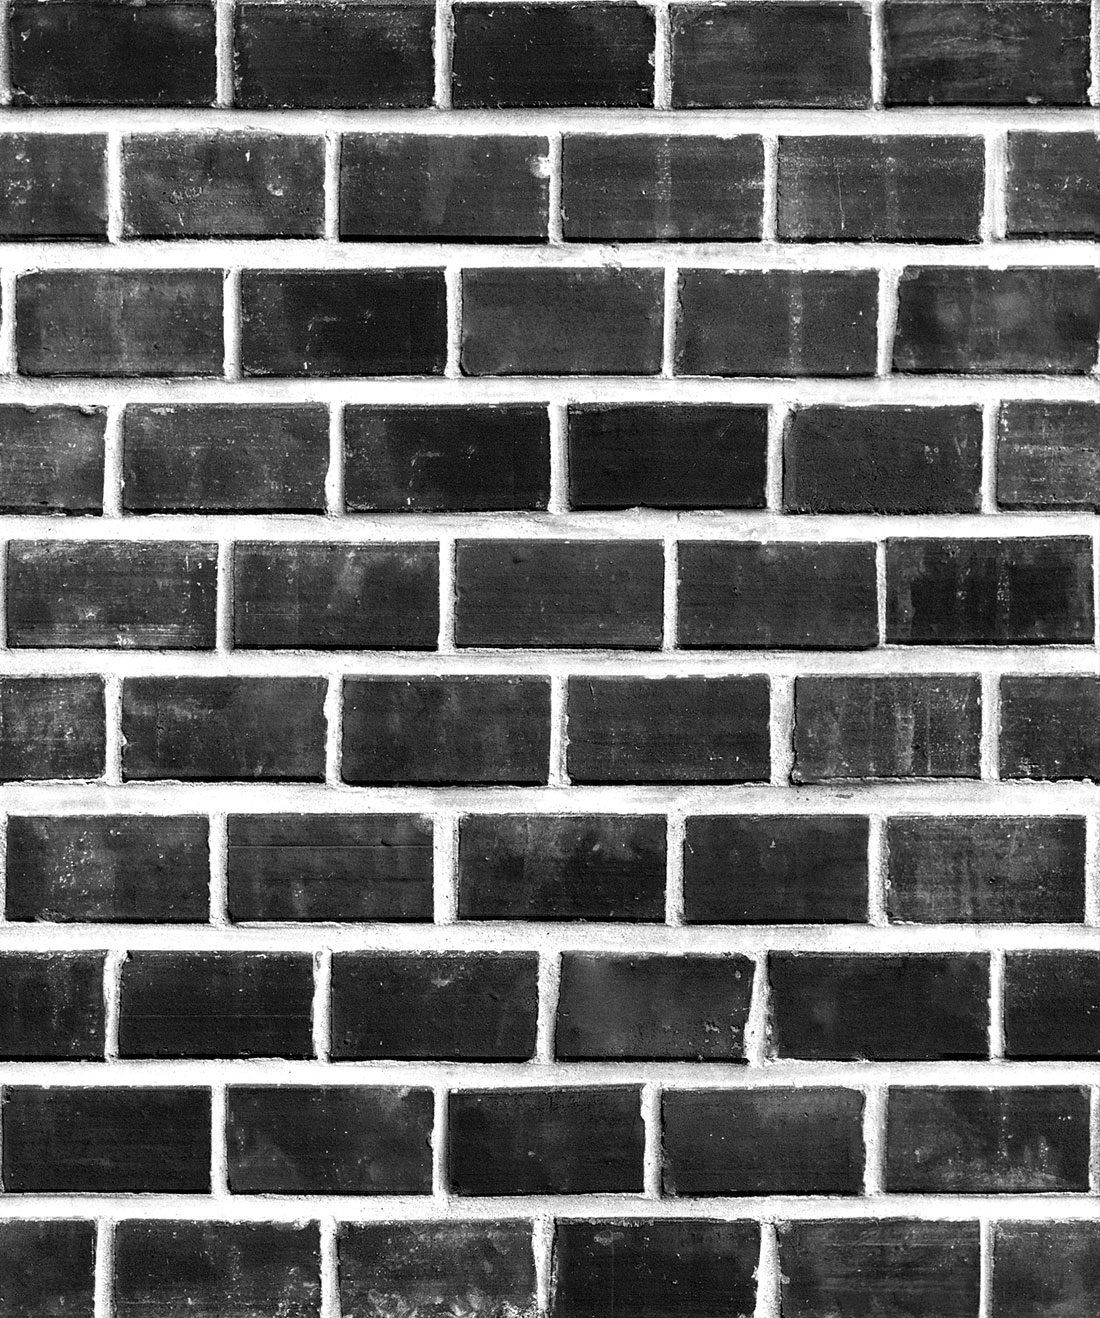 Lubeck Brick is an exposed brick wallpaper